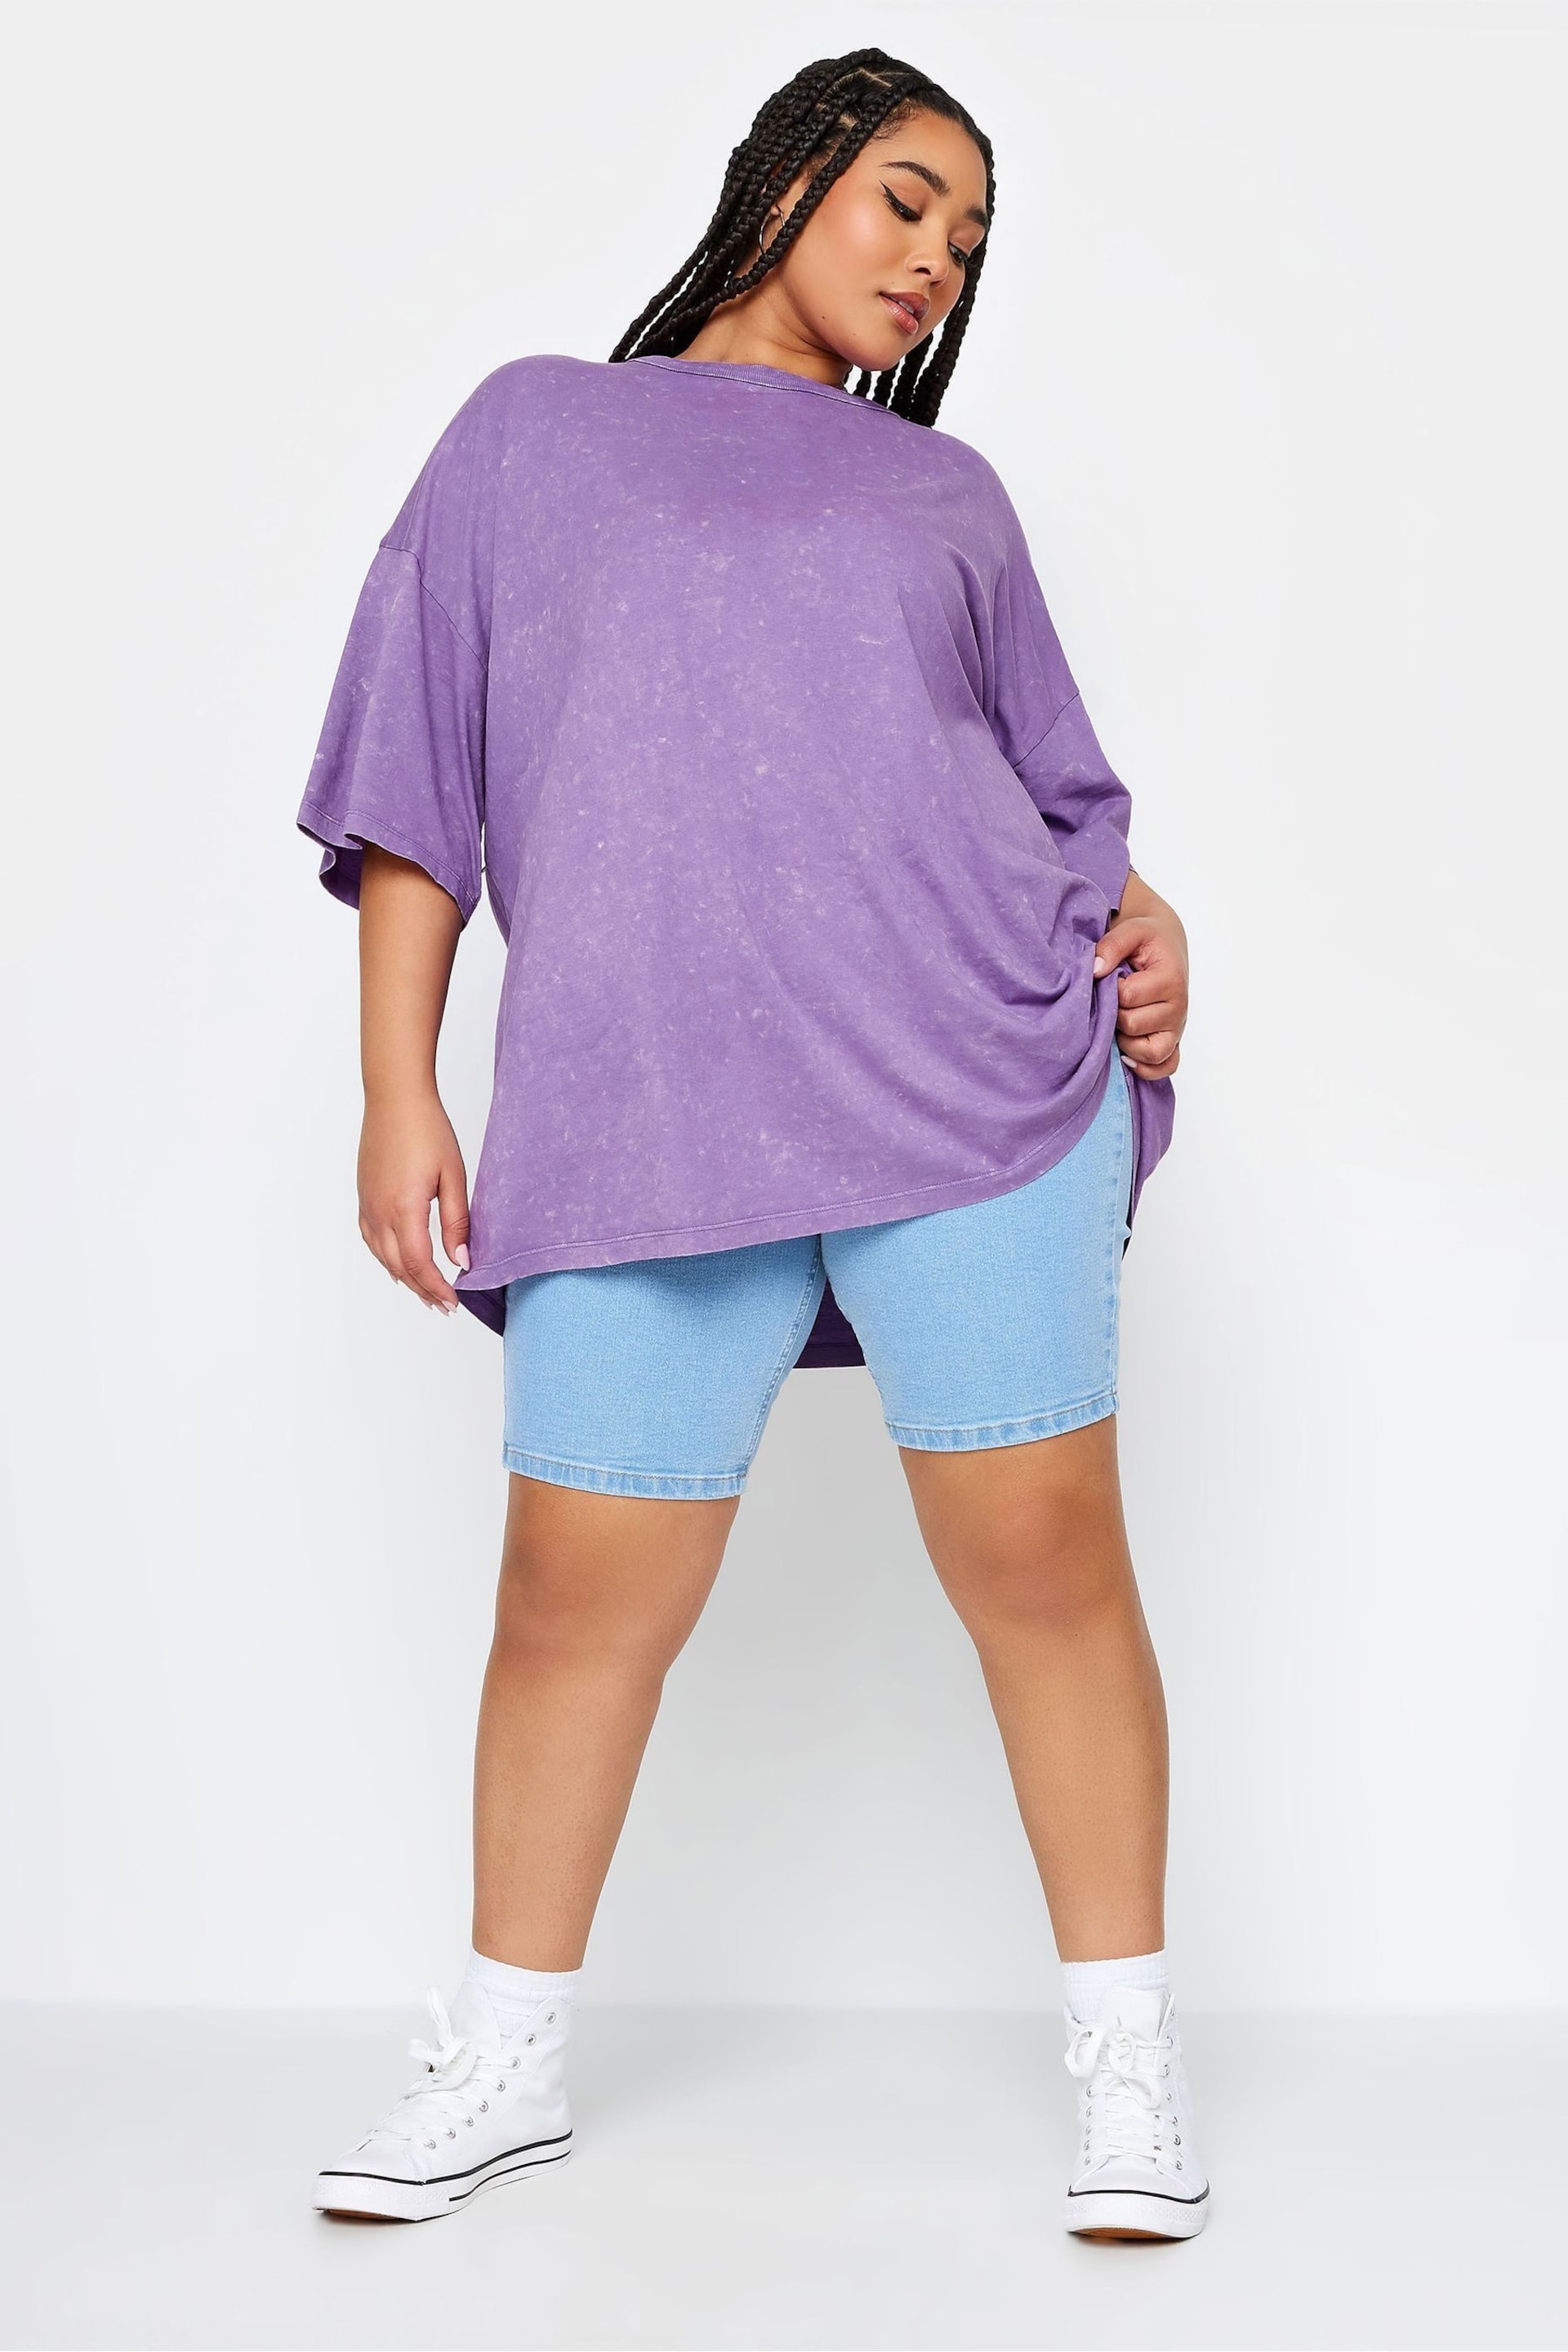 Yours Curve Purple Boxy T-Shirt - Image 2 of 4